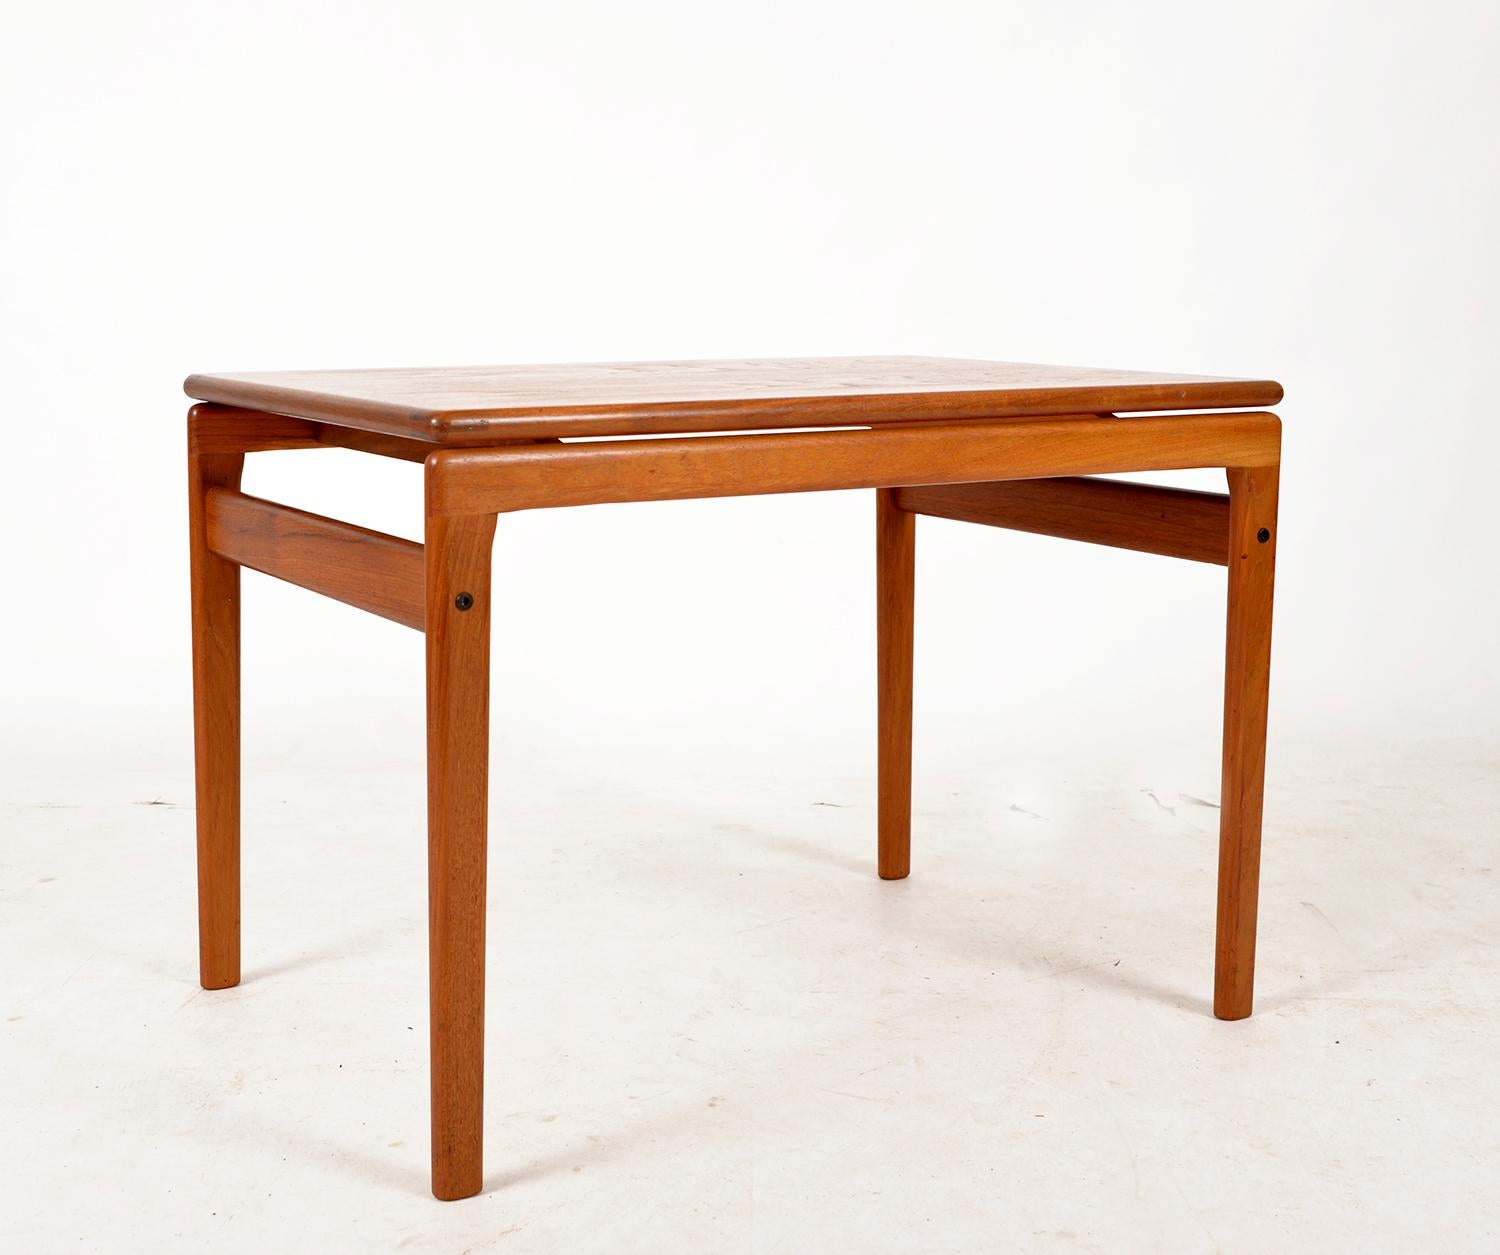 A well looked after 1960s Danish teak floating coffee / side table Branded “Trioh made in Denmark” to the underside. The clever design of the table gives the impression that the top is floating. It has a good colour and an attractive grain,